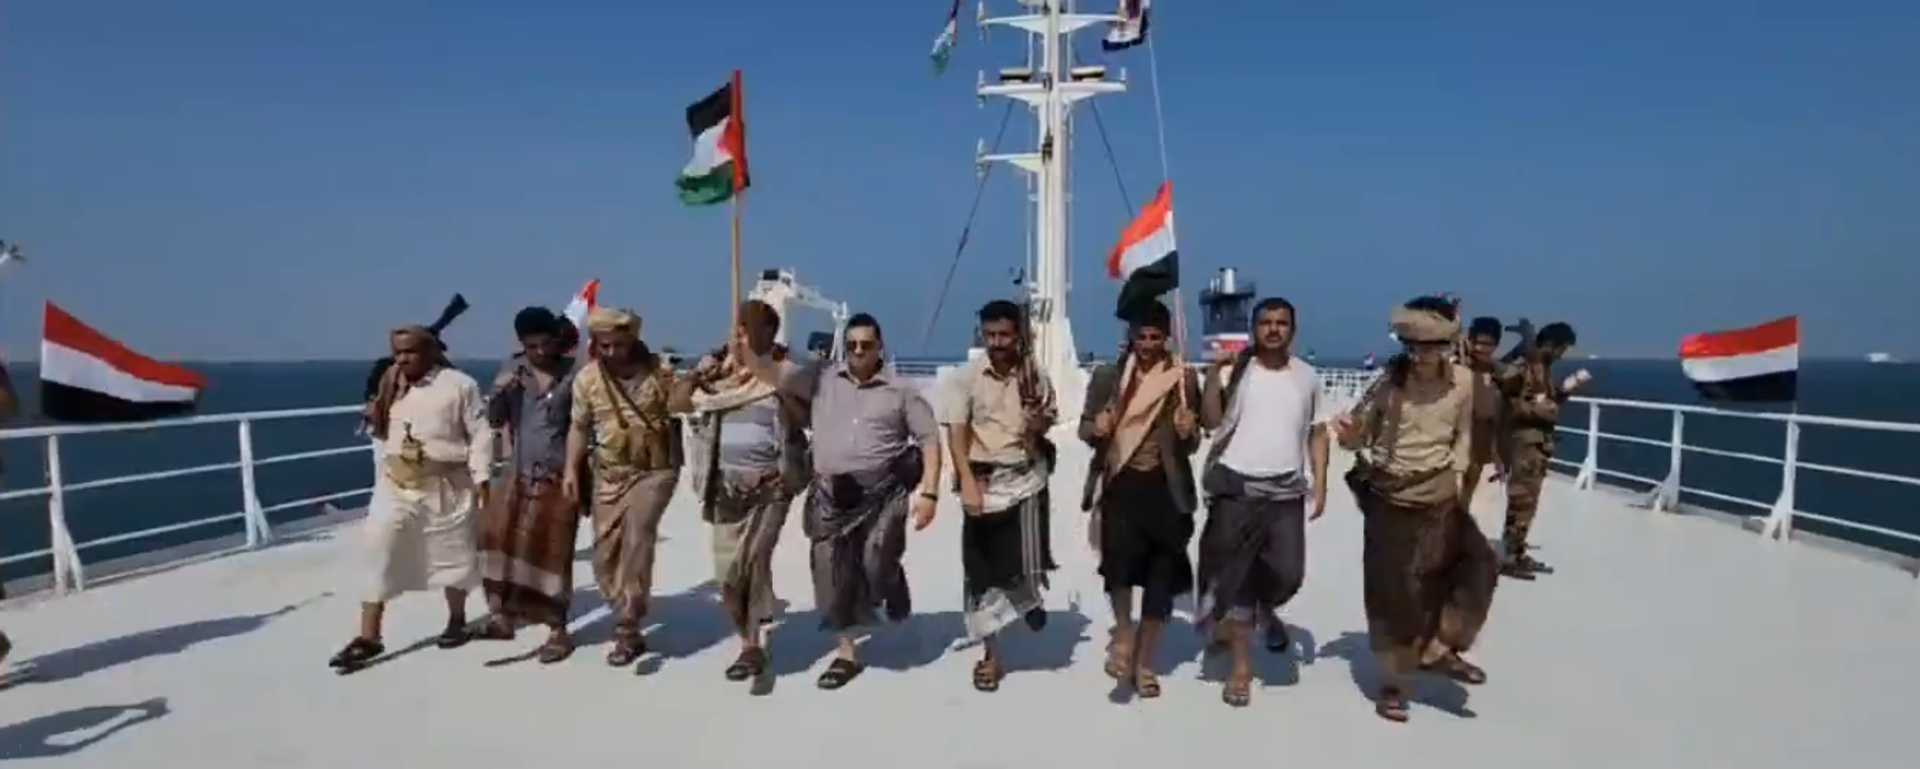 Houthis do their traditional war dance aboard the Galaxy Leader after seizing the Israeli-owned ro-ro car transporter. Screengrab of social media video. - Sputnik International, 1920, 04.04.2024